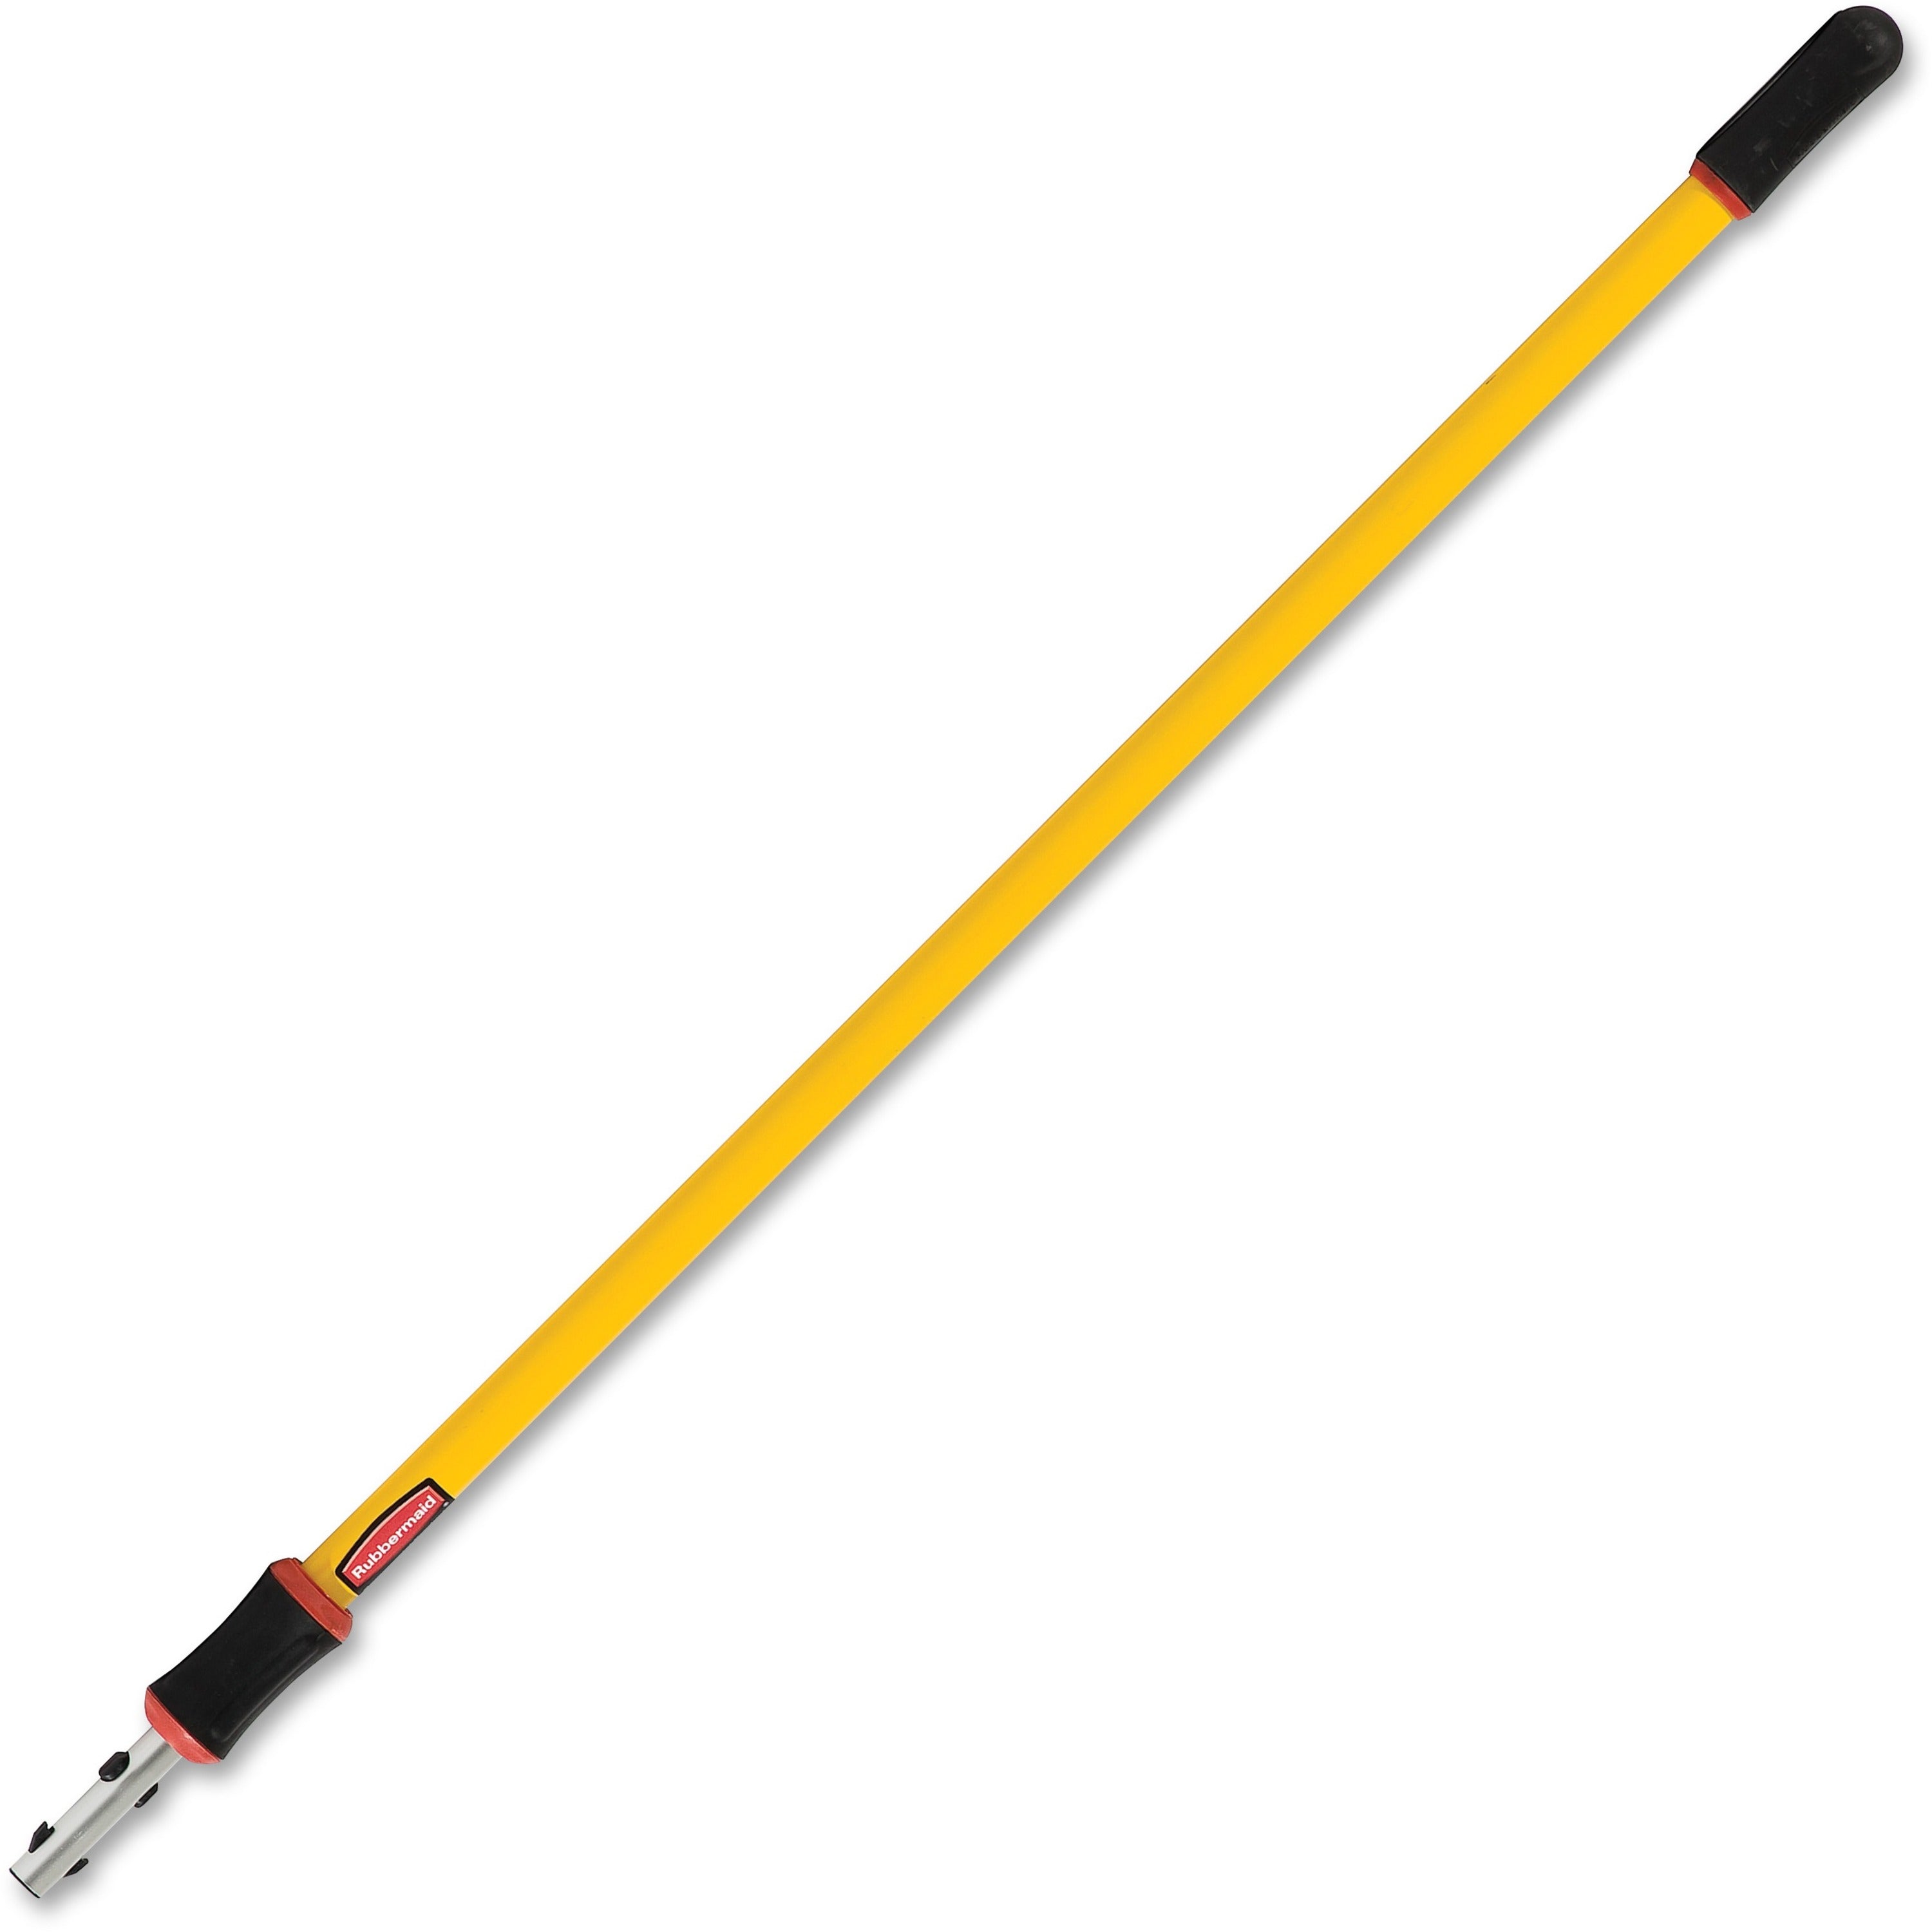 rubbermaid-commercial-4-8-quick-connect-extension-pole-96-length-140-diameter-yellow-aluminum-6-carton_rcpq76500yl00ct - 1